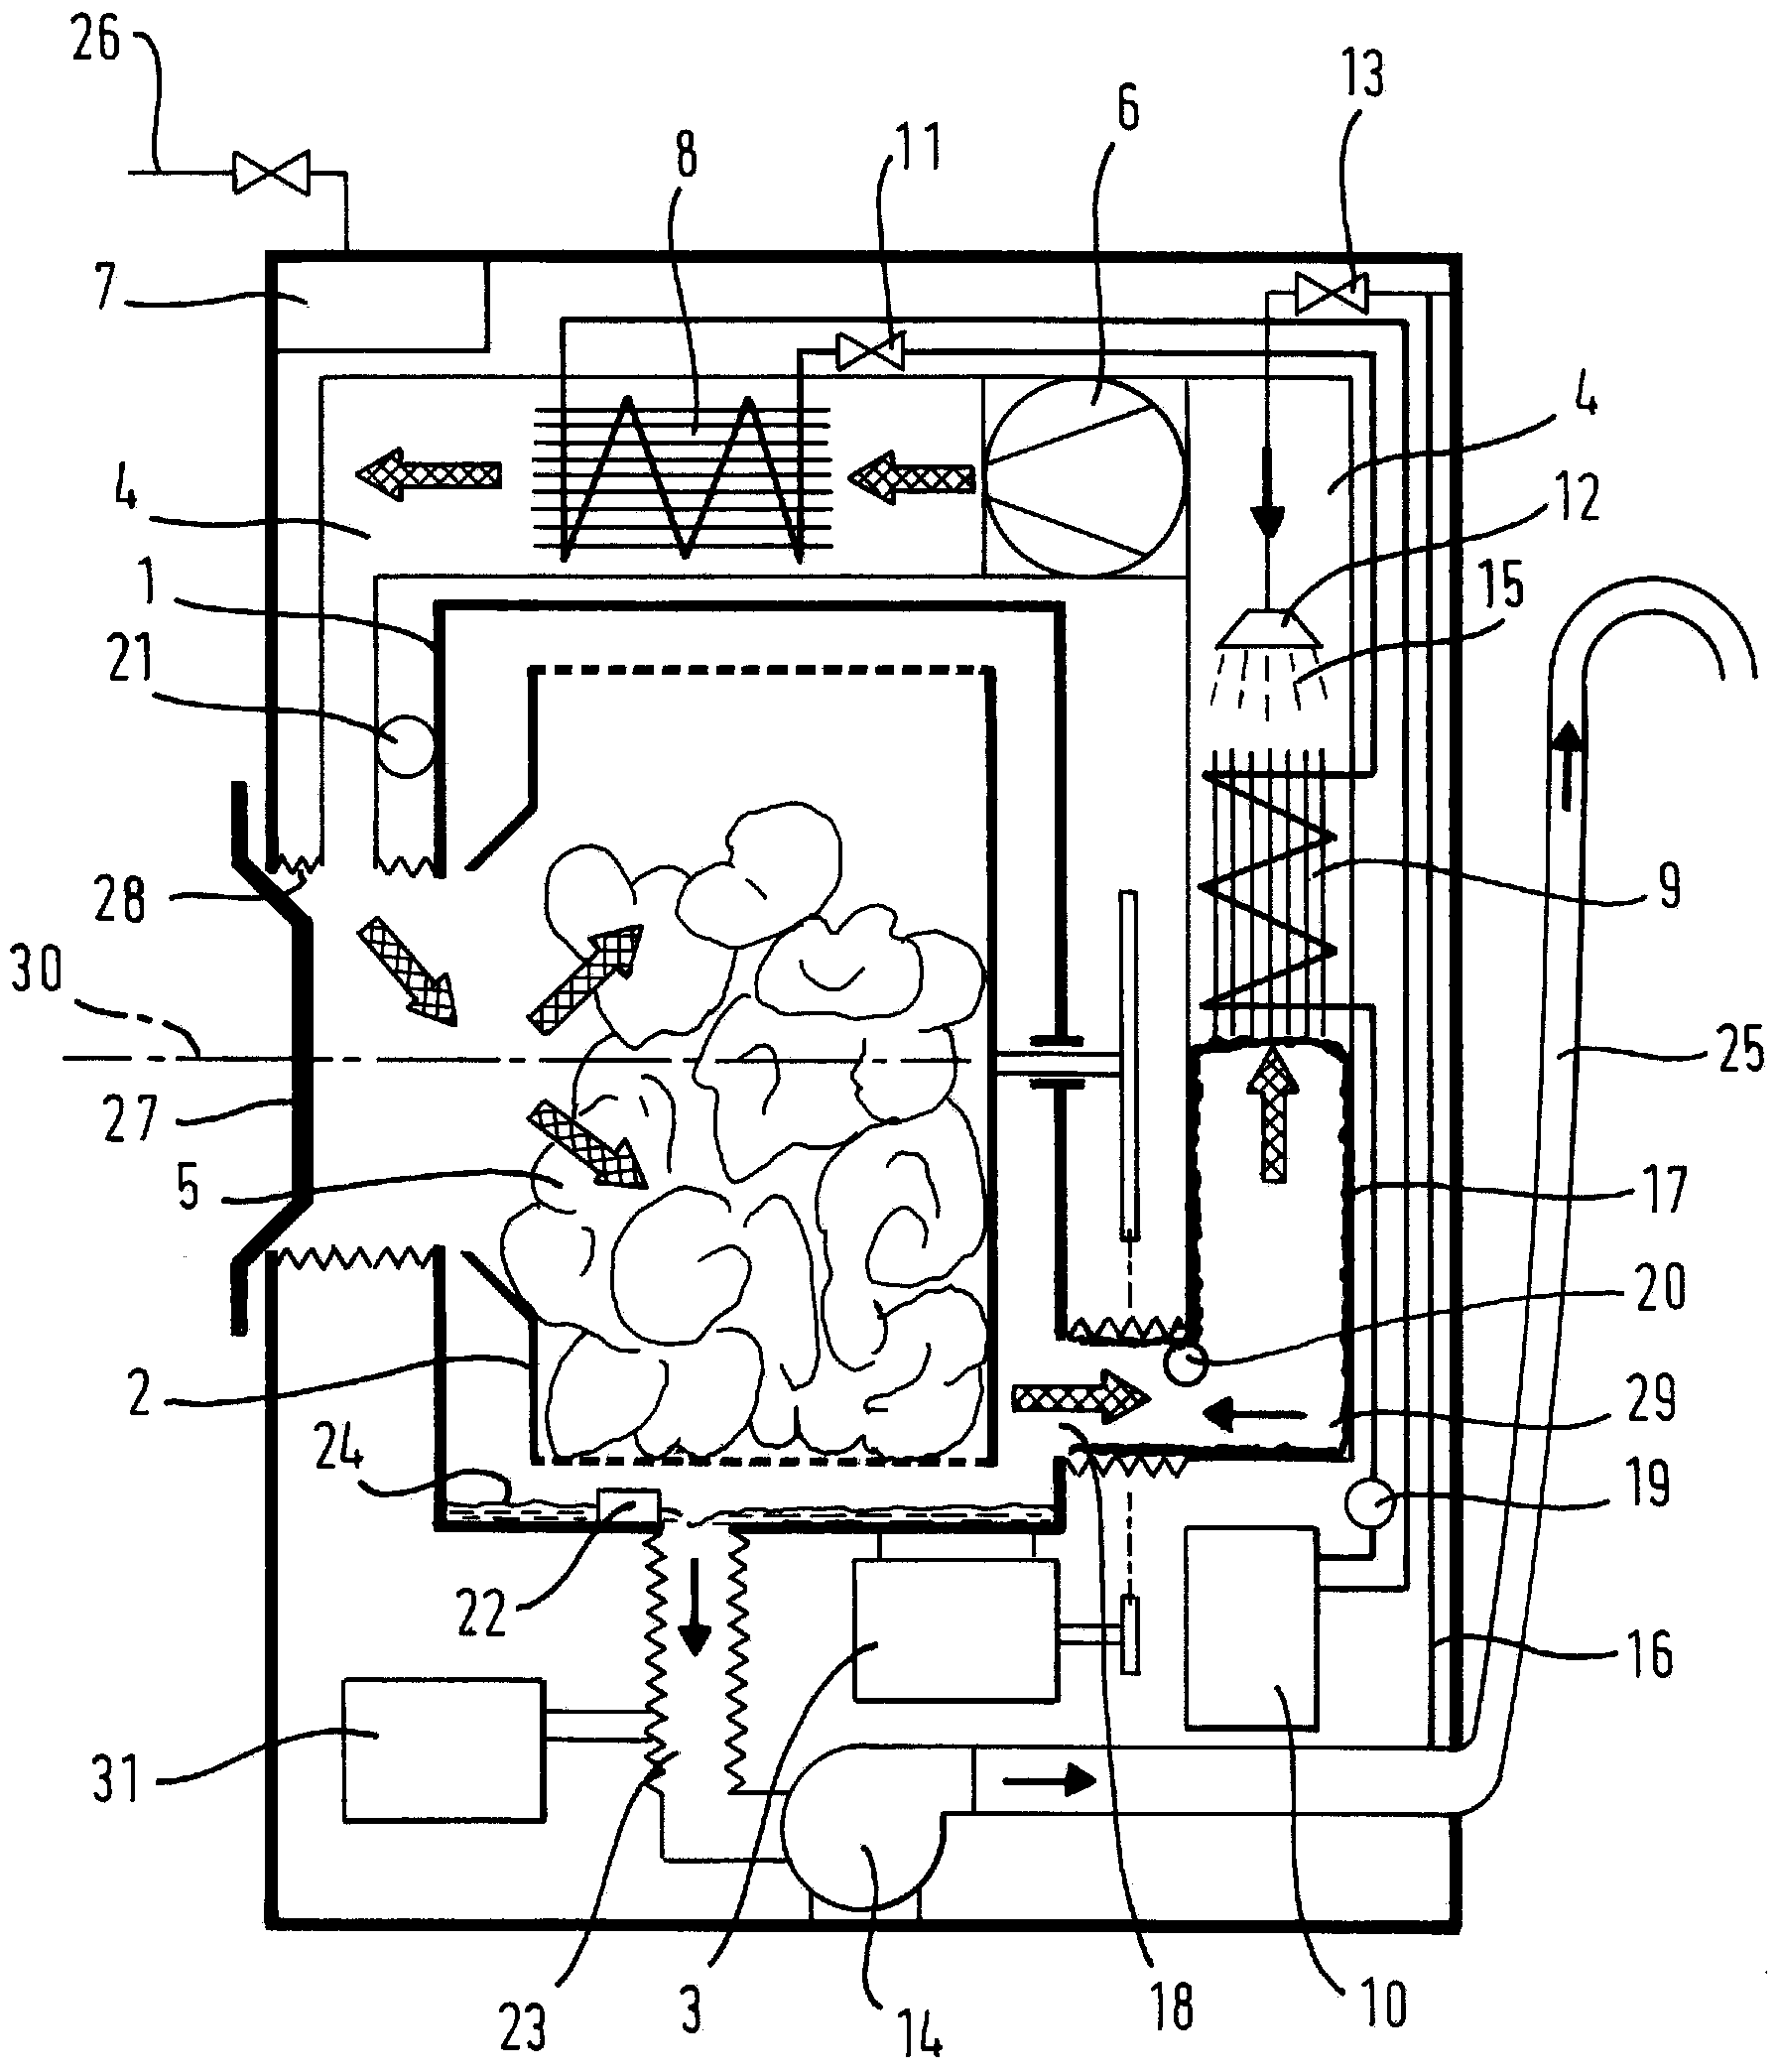 Process For Operating A Washer Dryer With A Heat Pump, And A Suitable Washer Dryer